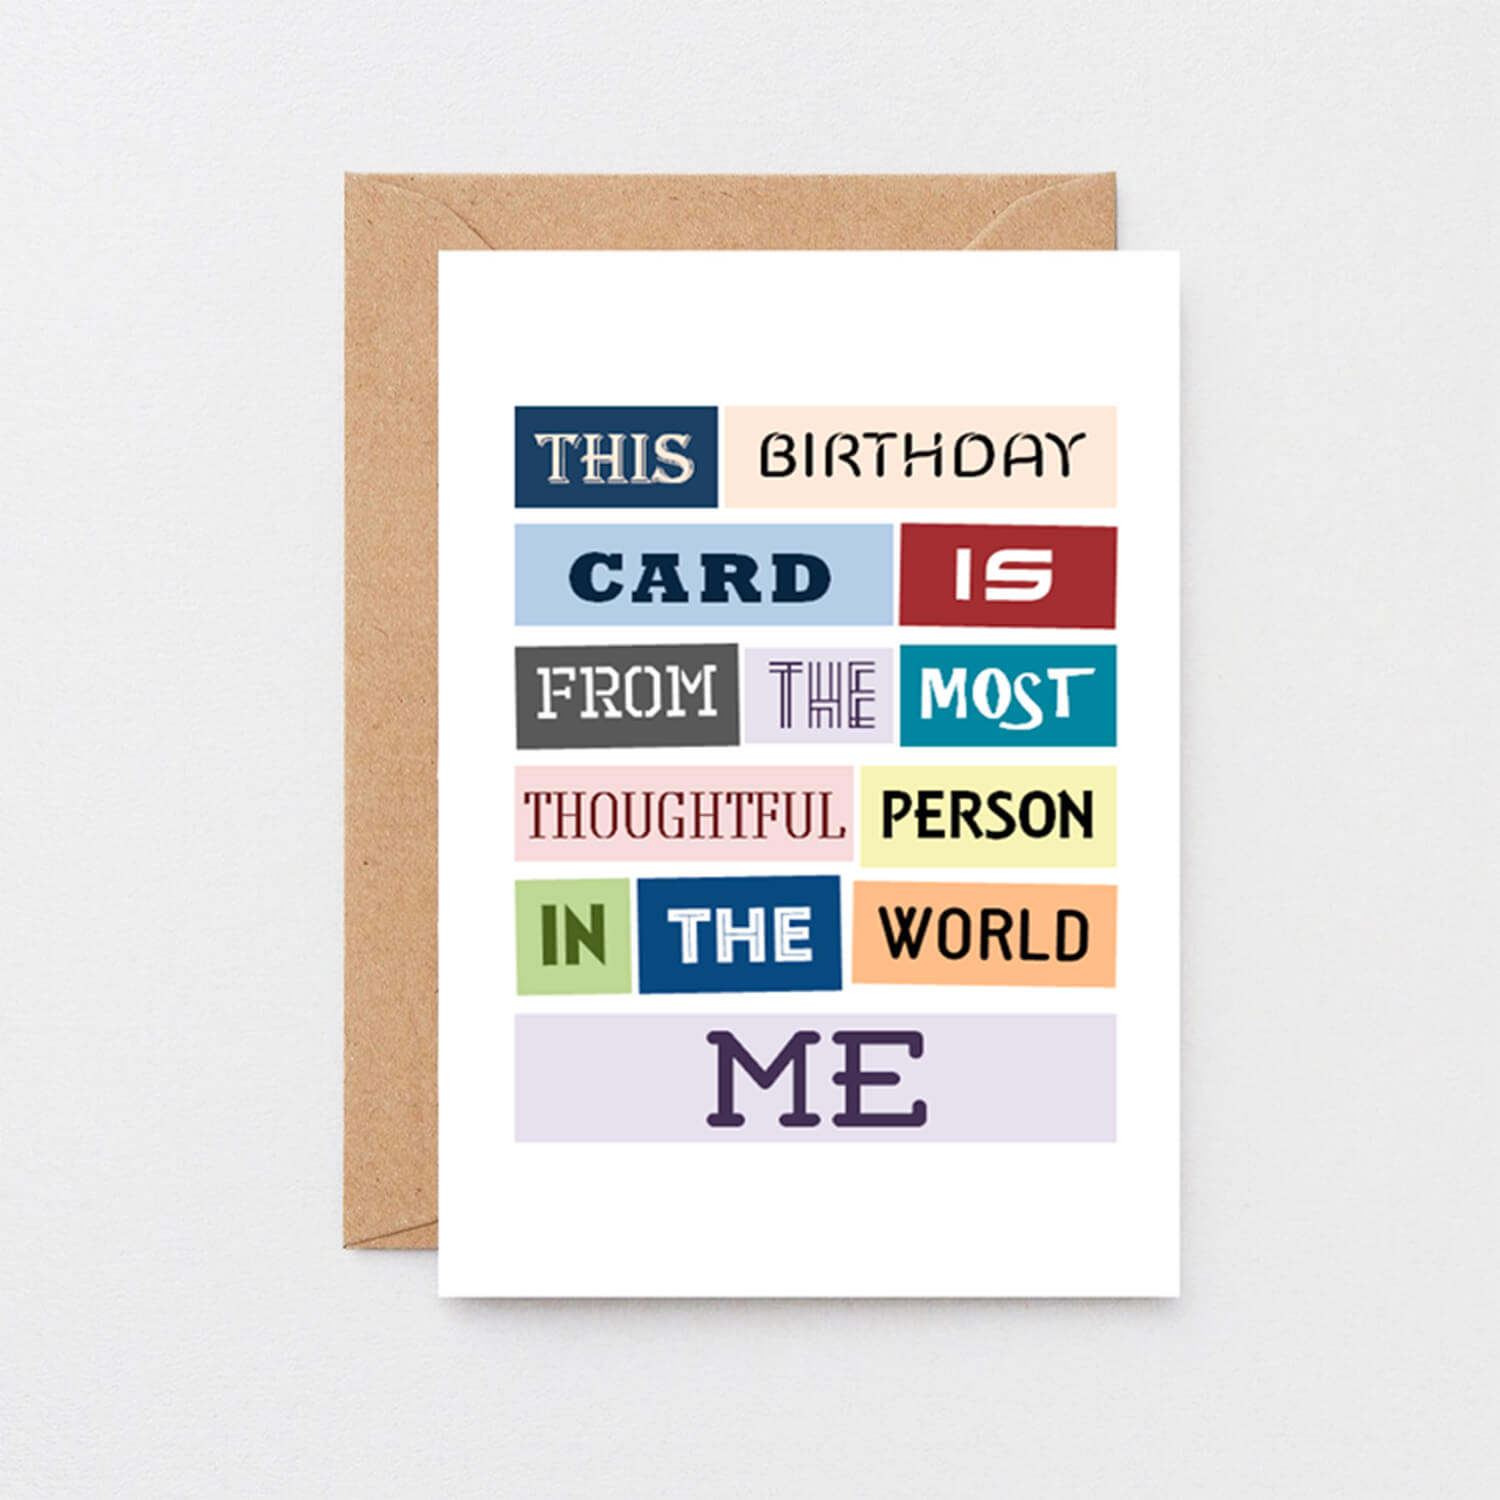 Birthday Card by SixElevenCreations. Reads This birthday card is from the most thoughtful person in the world. Me. Product Code SE0080A6